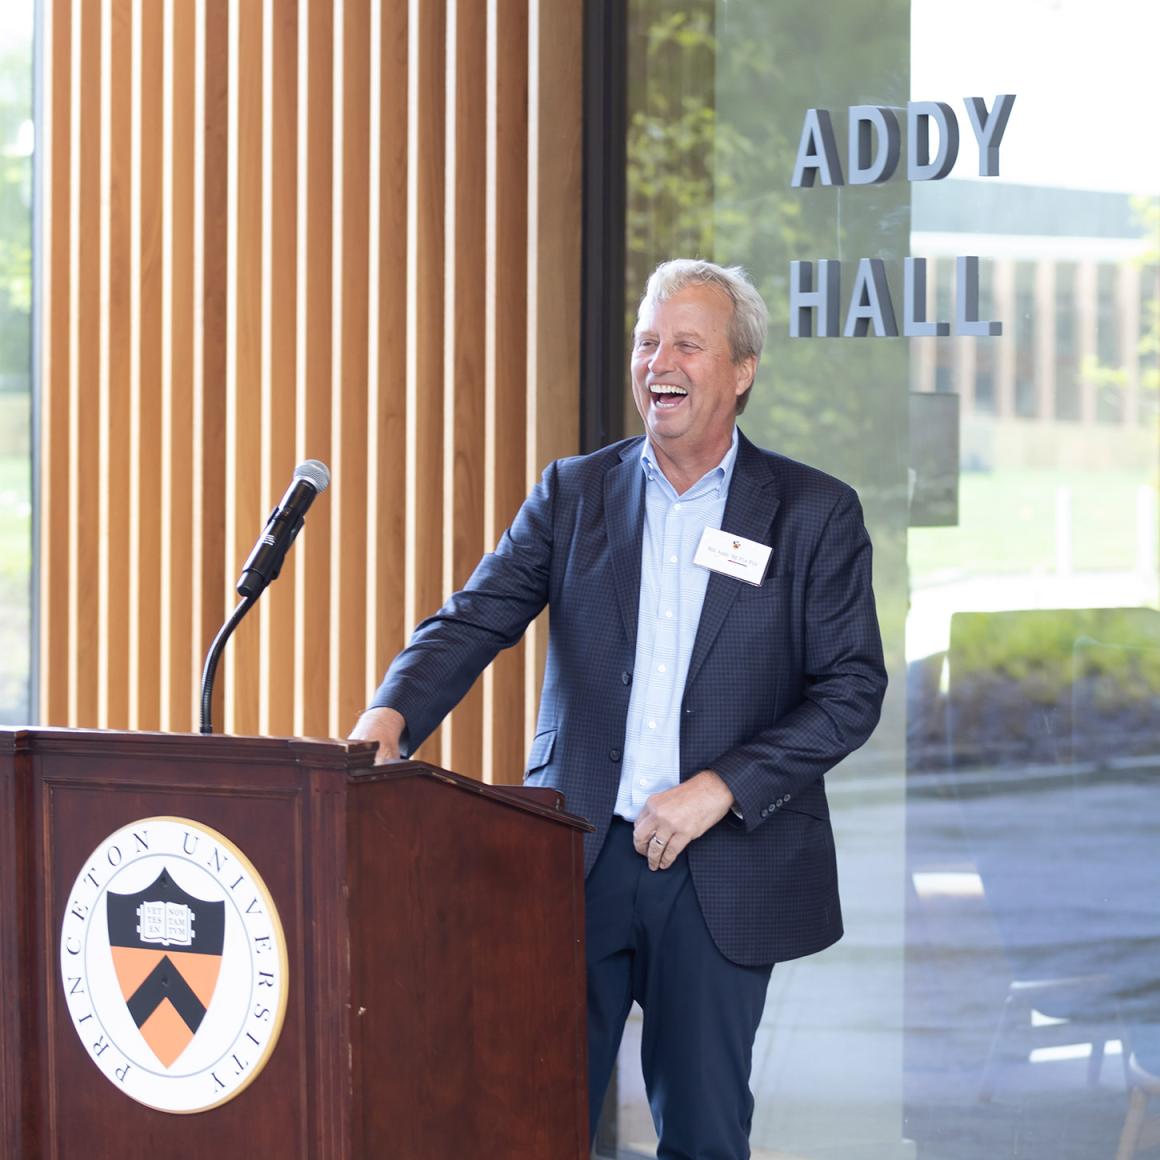 Bill Addy laughs during his speech dedicating Addy Hall